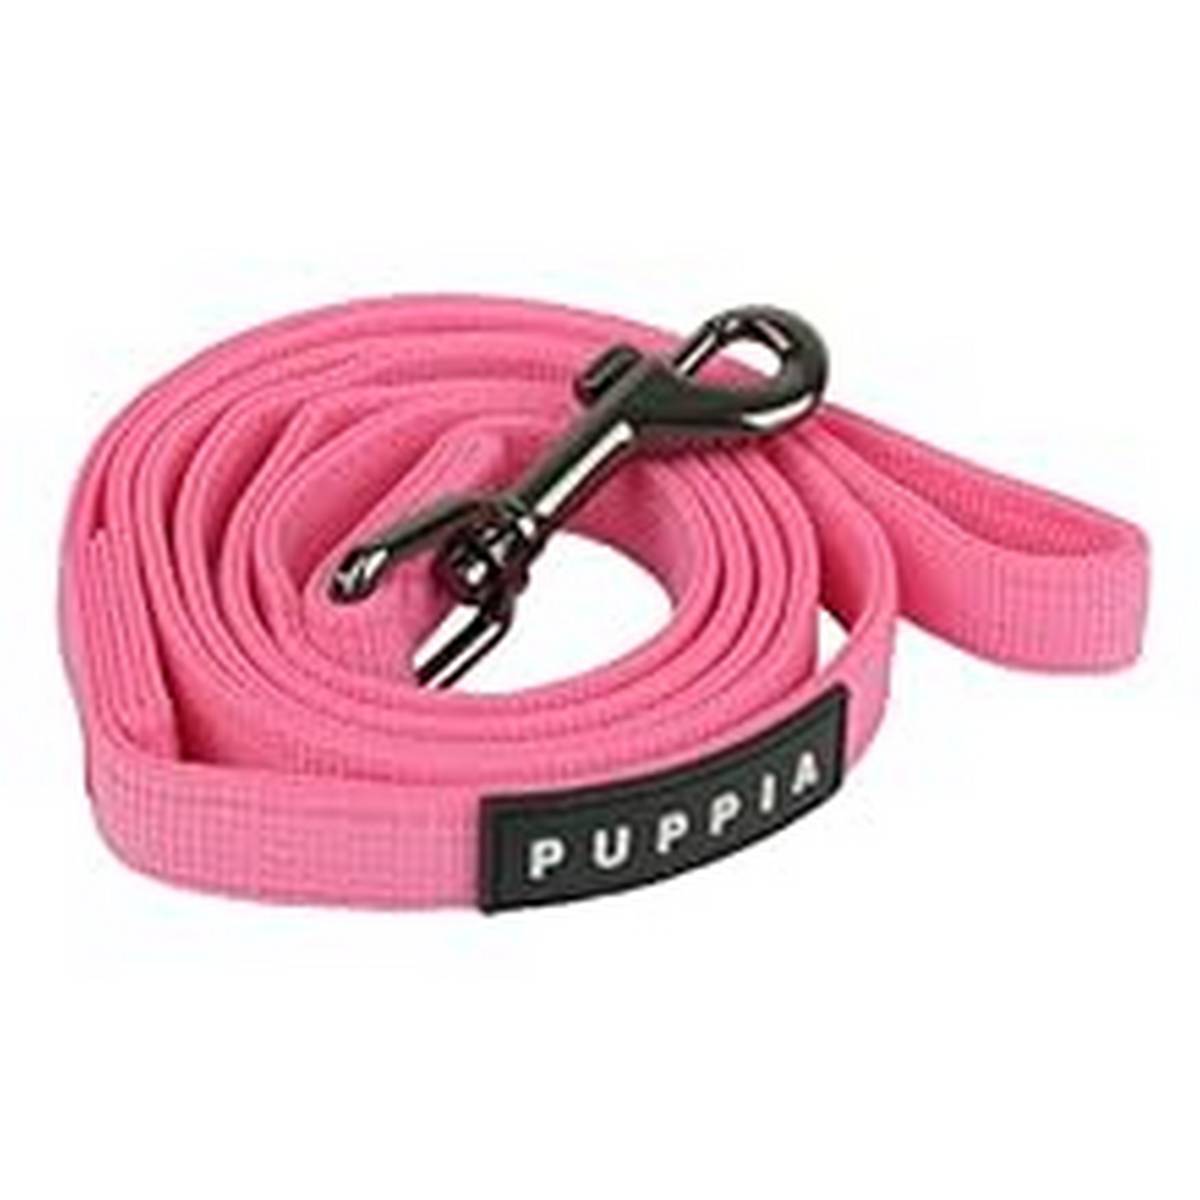 Supplies_Puppia Two Tone Dog Lead Strong Durable Comfortable Grip Walking Training Leash for Small & Medium Dog Pink Small